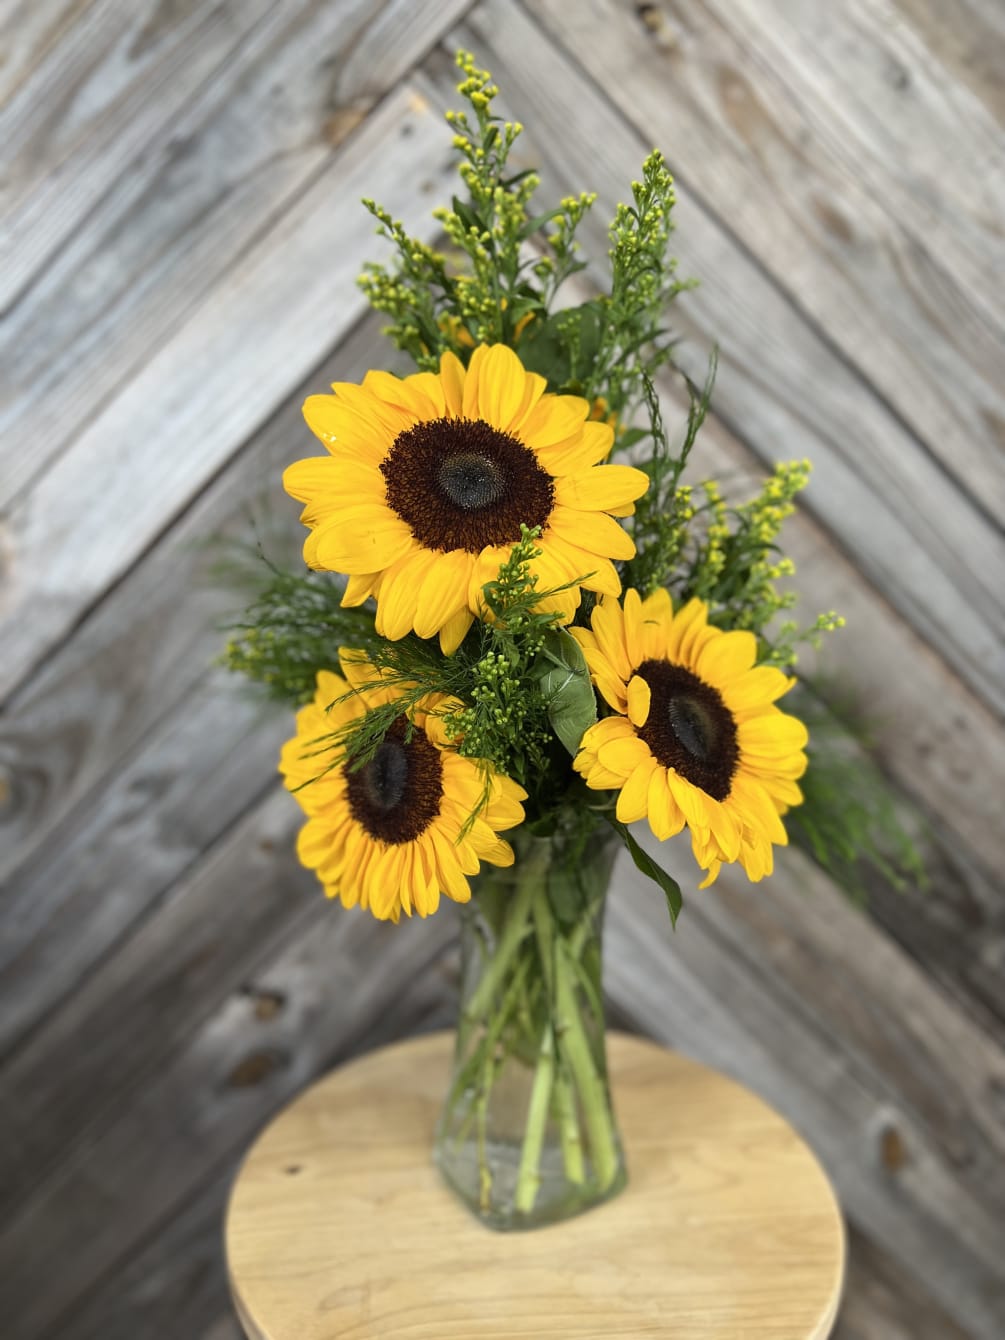 A captivating flower arrangement with large sunflowers and tree fern in a